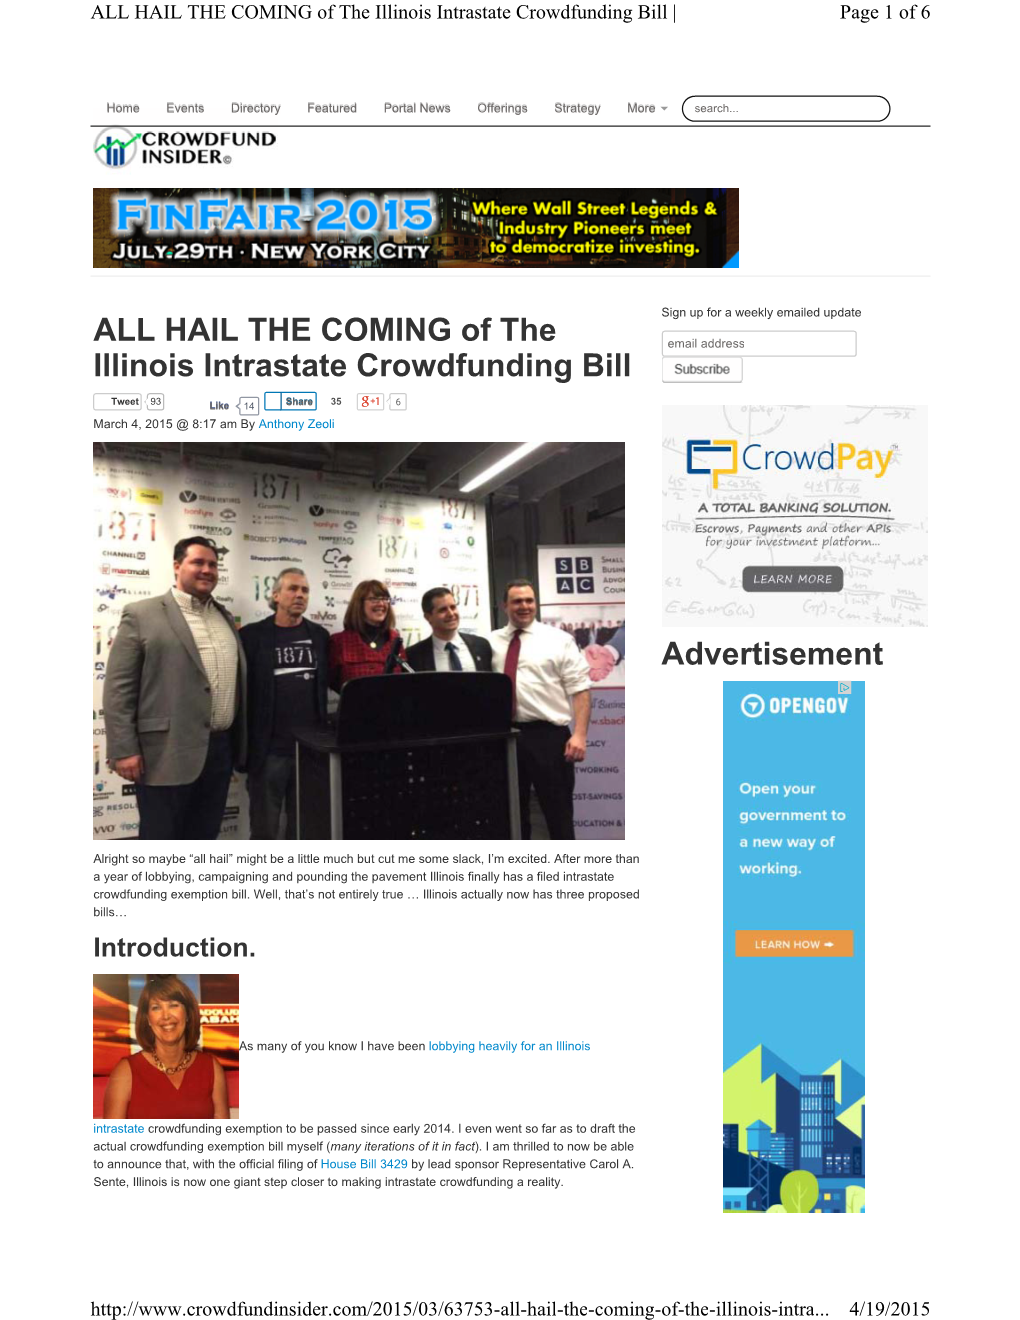 HAIL the COMING of the Illinois Intrastate Crowdfunding Bill | Page 1 of 6